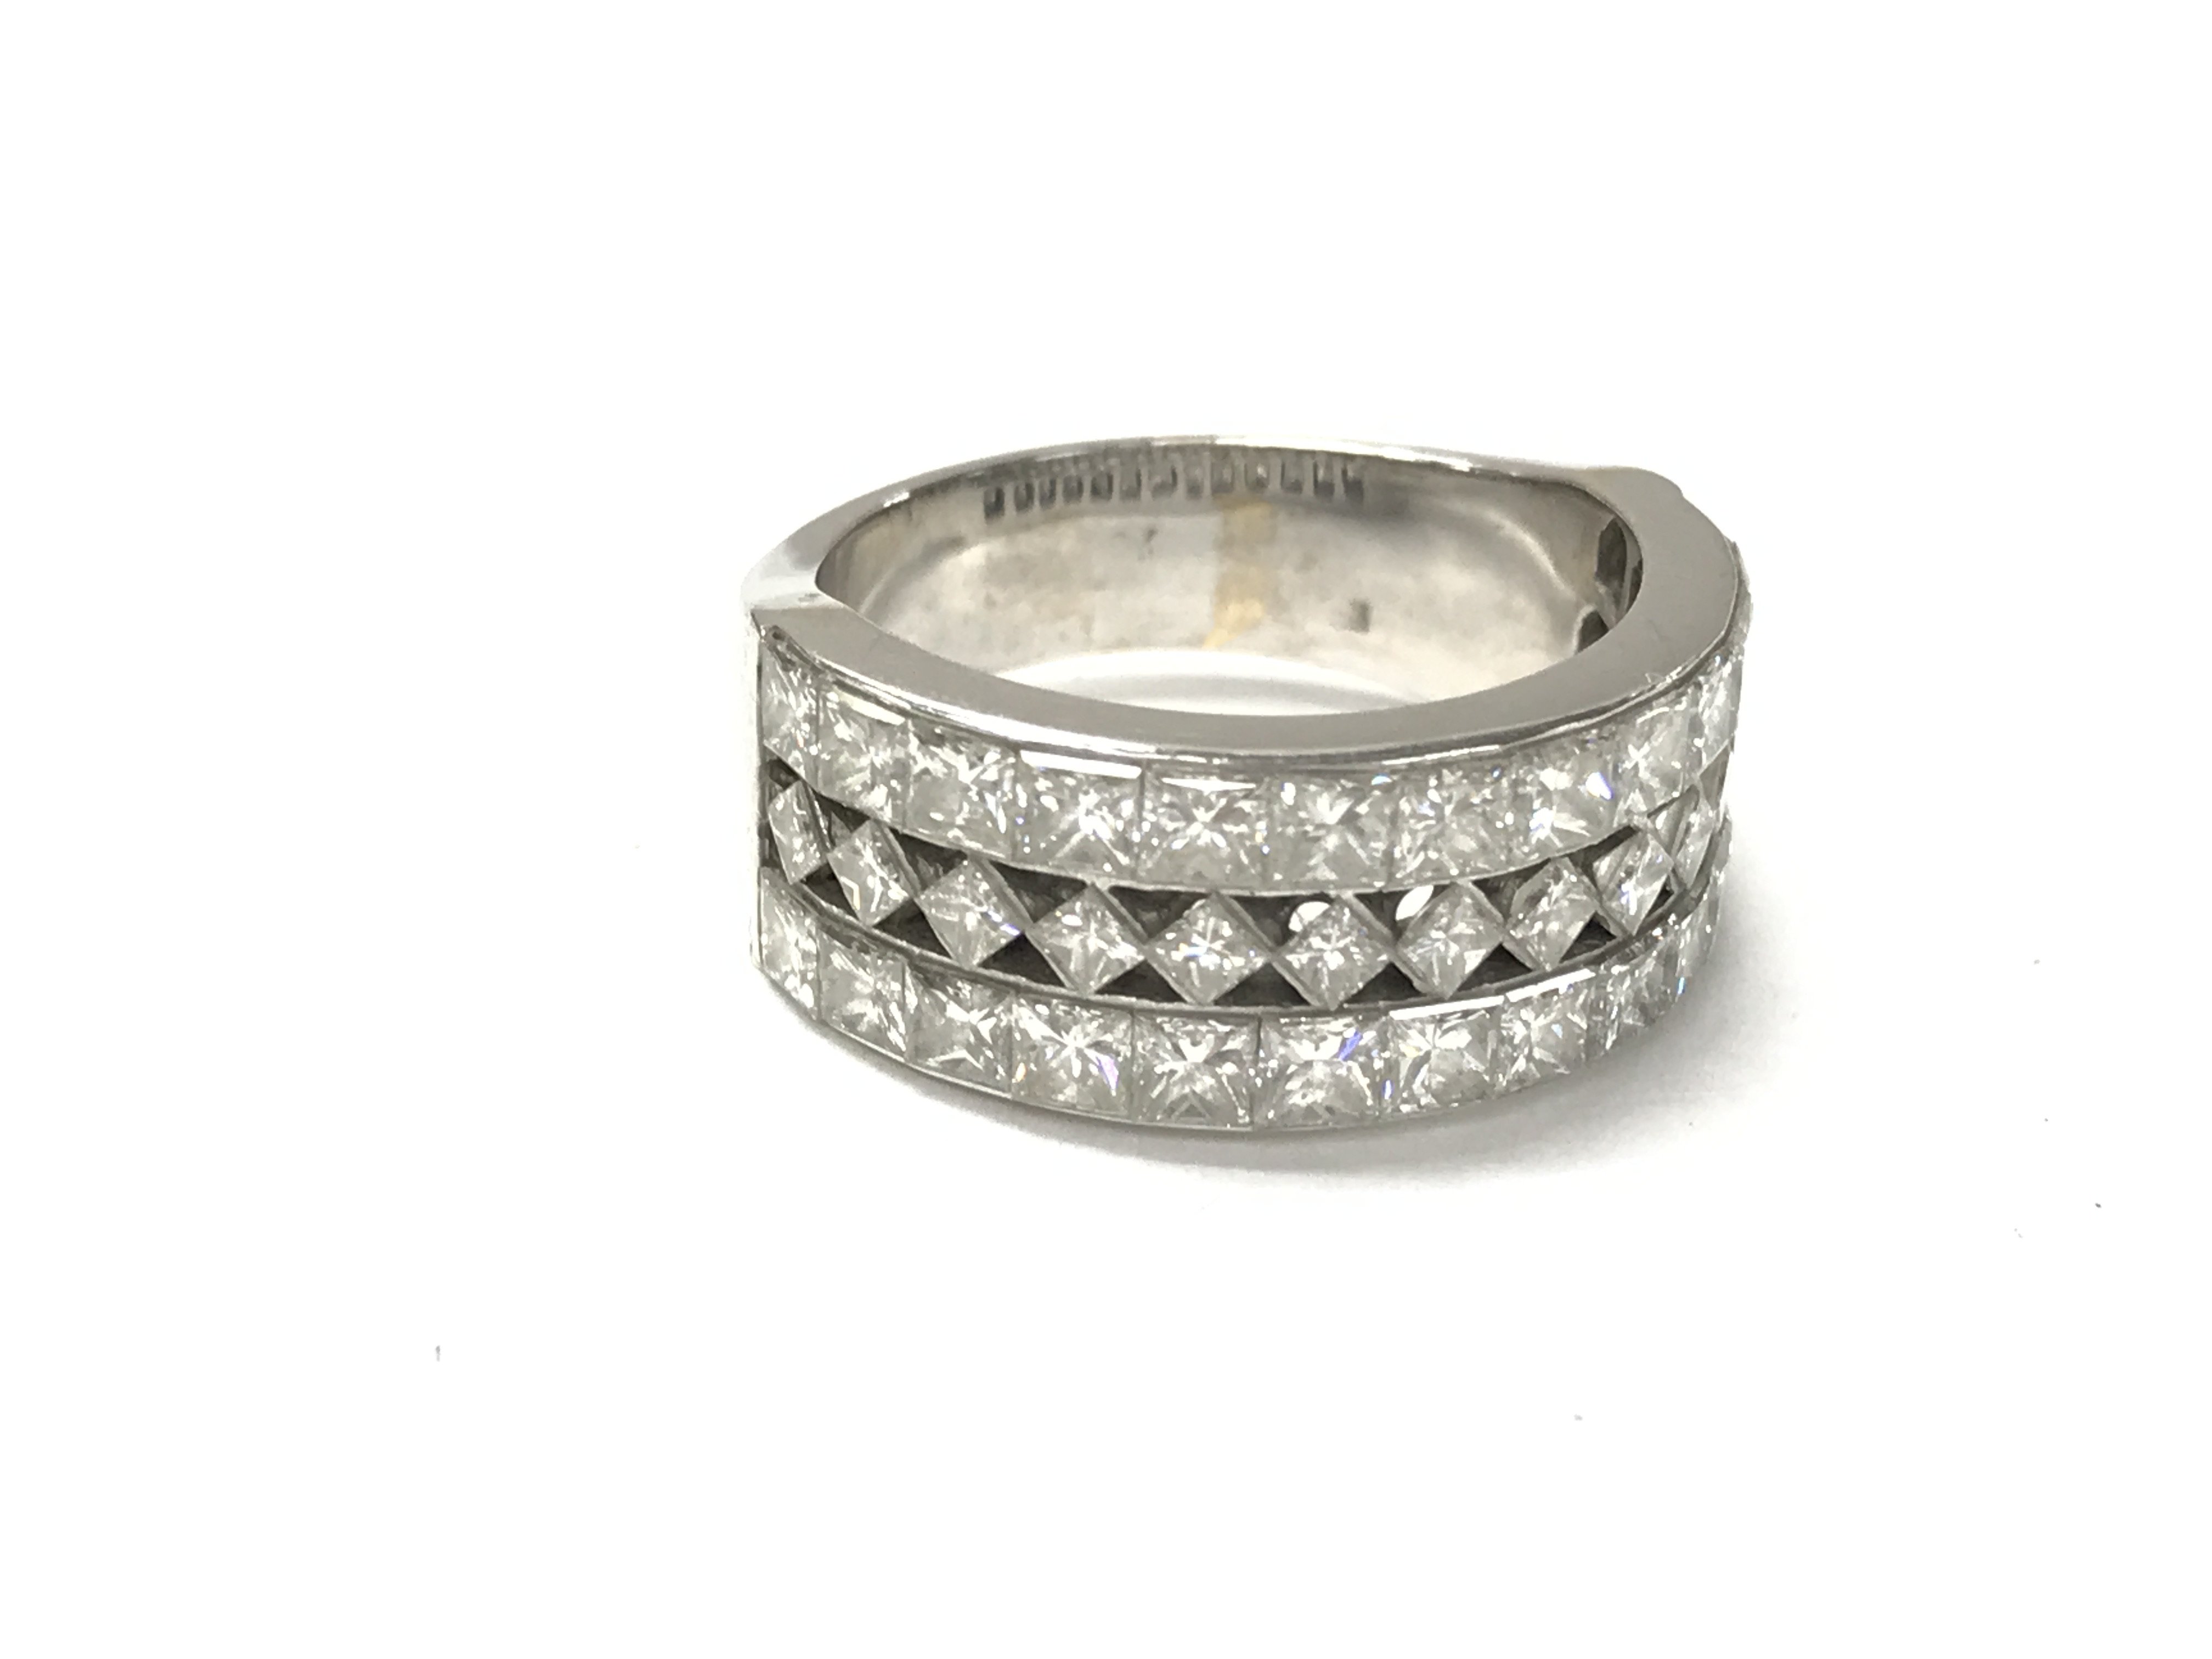 A high ct white gold ring with approximately 2ct o